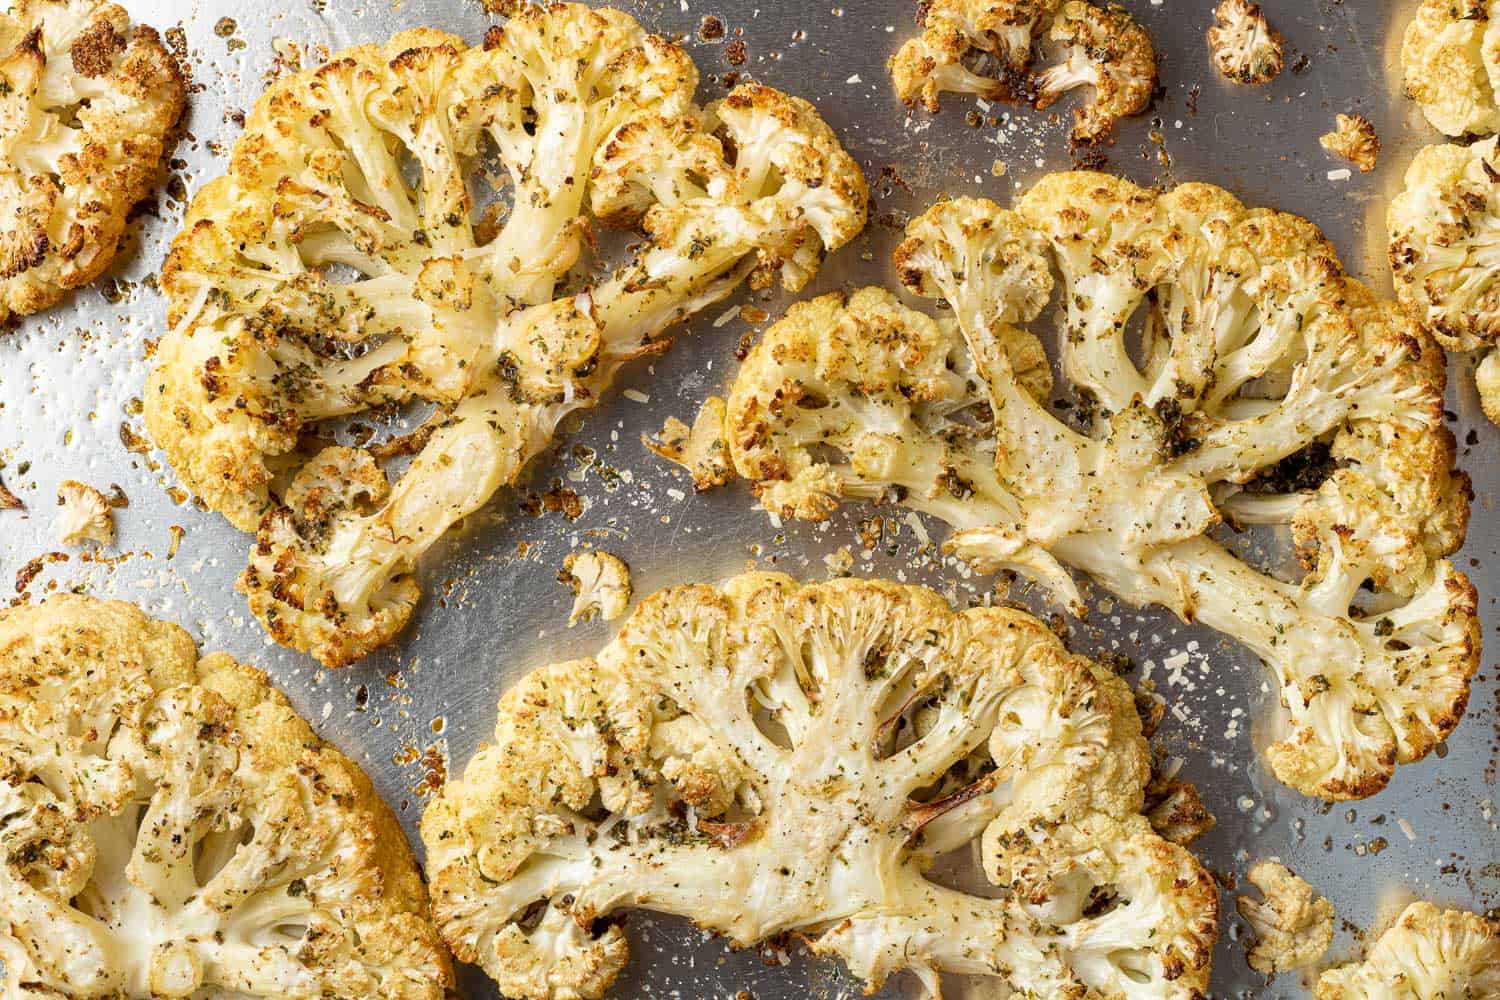 Roasted cauliflower slices on a silver sheet pan.